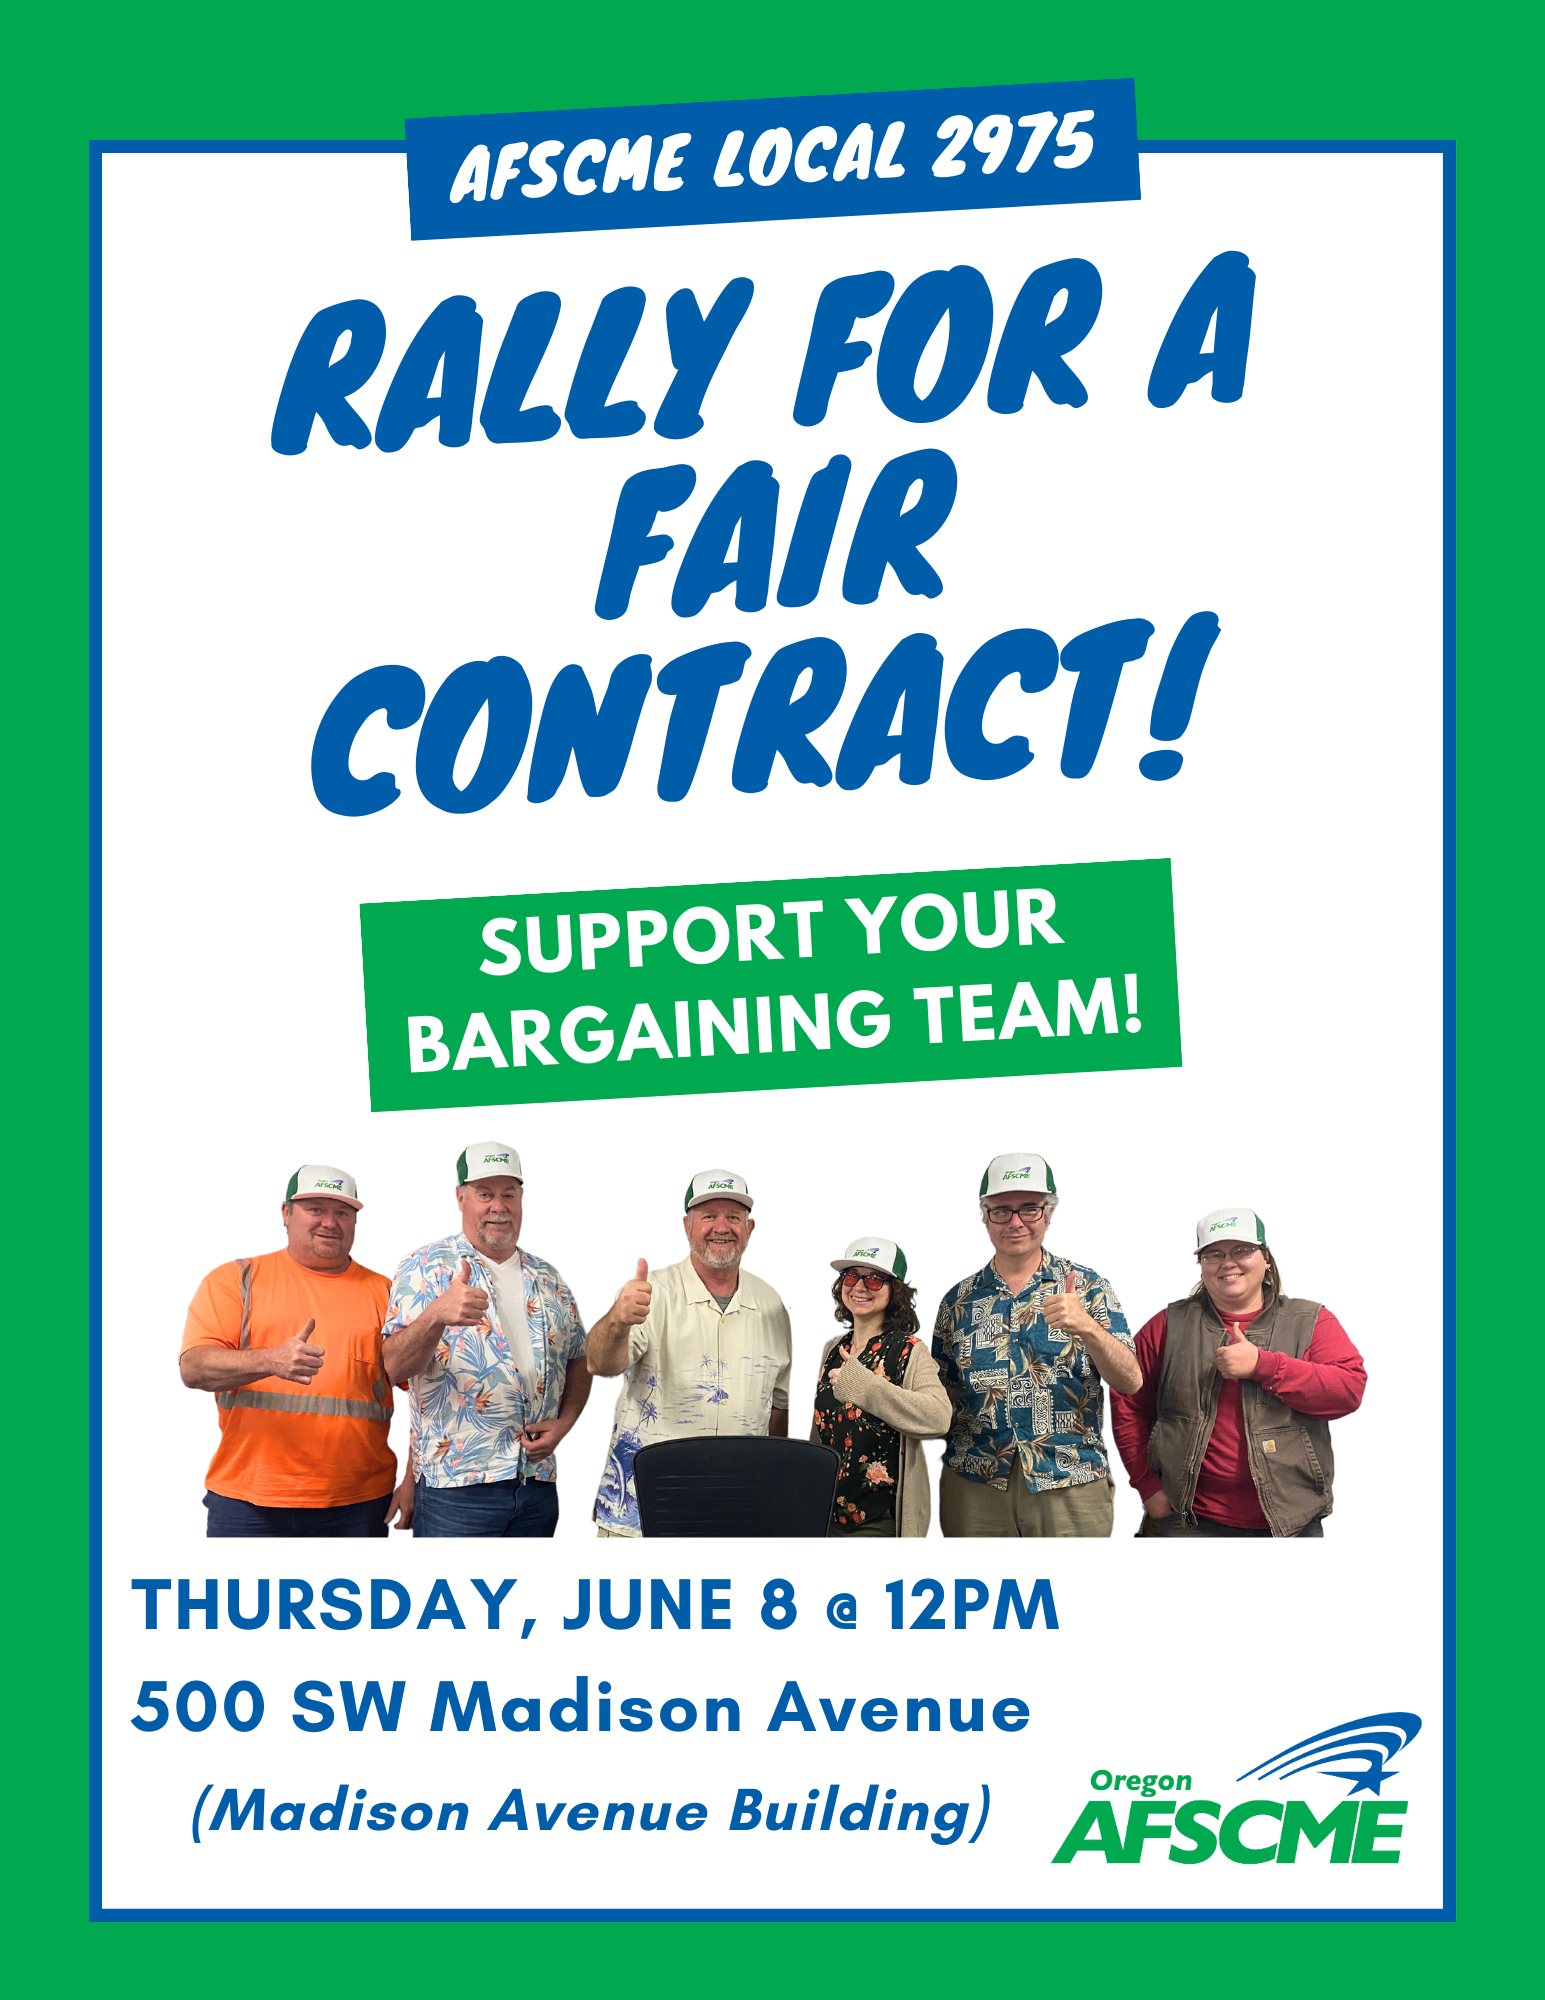 Rally for a Fair Contract! Support Your Bargaining Team! Thursday, June 8 at 12PM, 500 SW Madison Ave.